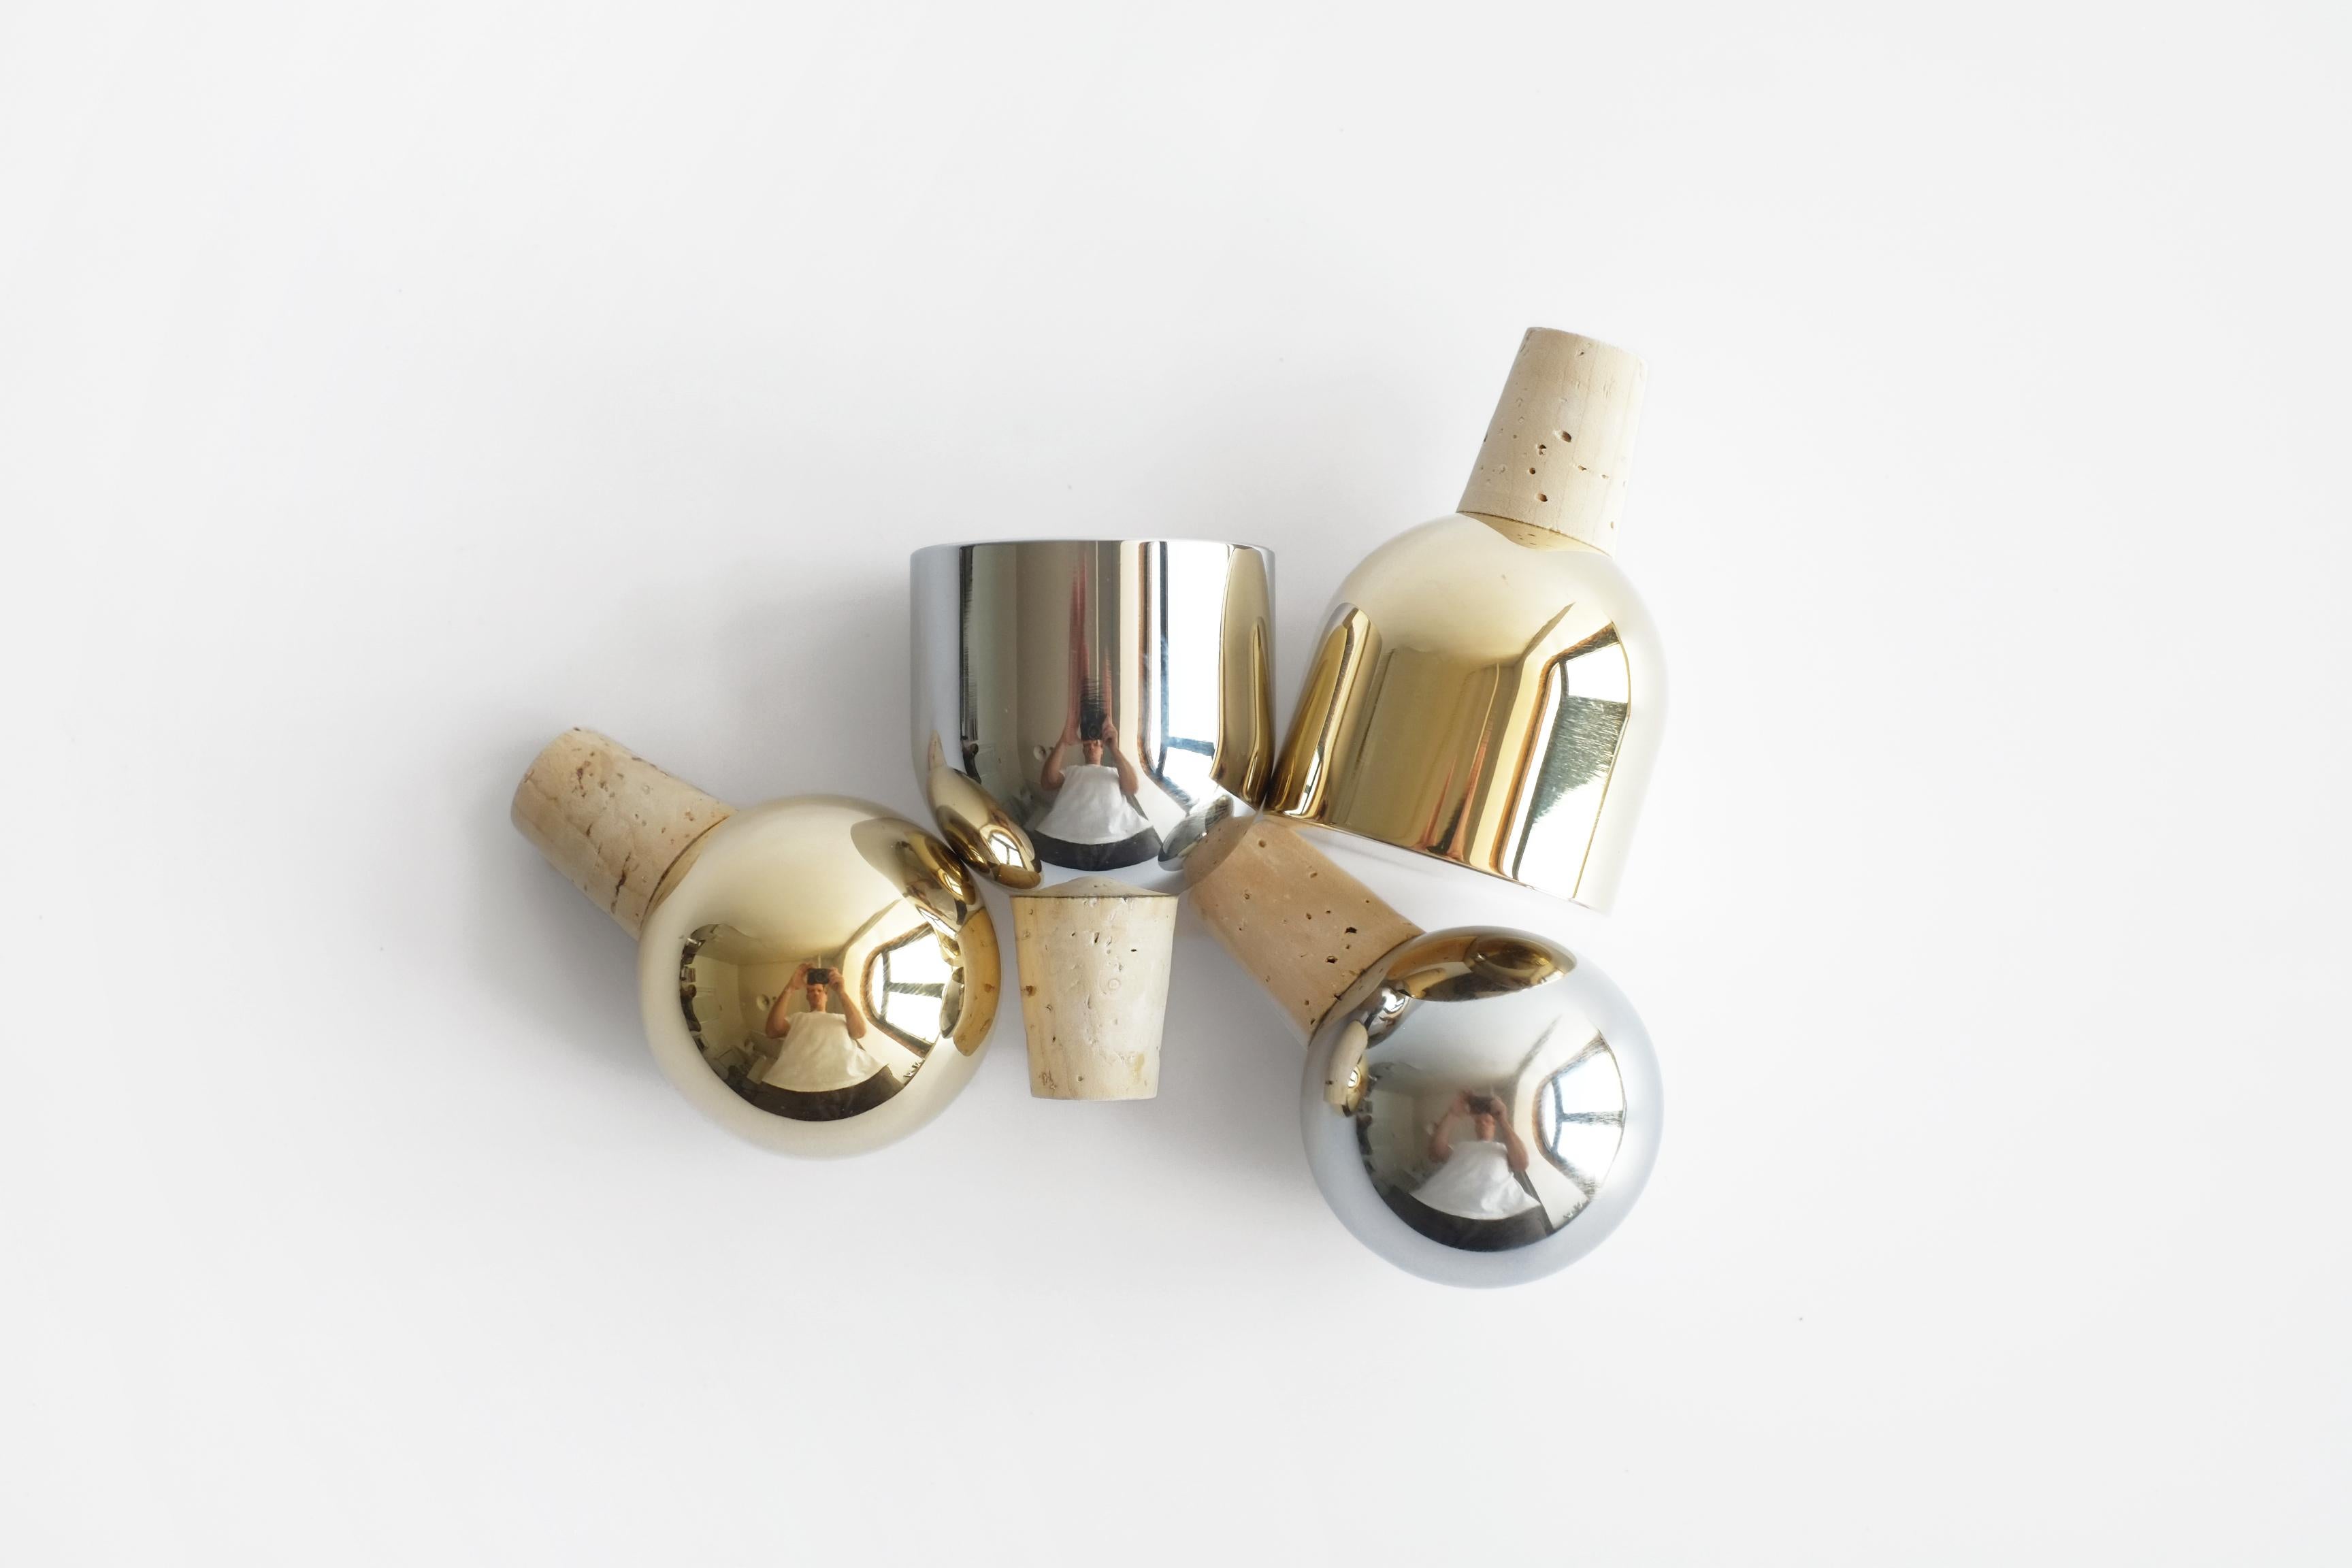 These new sphere and dome shaped wine stoppers appear to float as they sit on top of a favorite bottle of open wine. They will make you want to save some of the bottle for the next day (well, almost). 

The mirror polished finish illuminates the